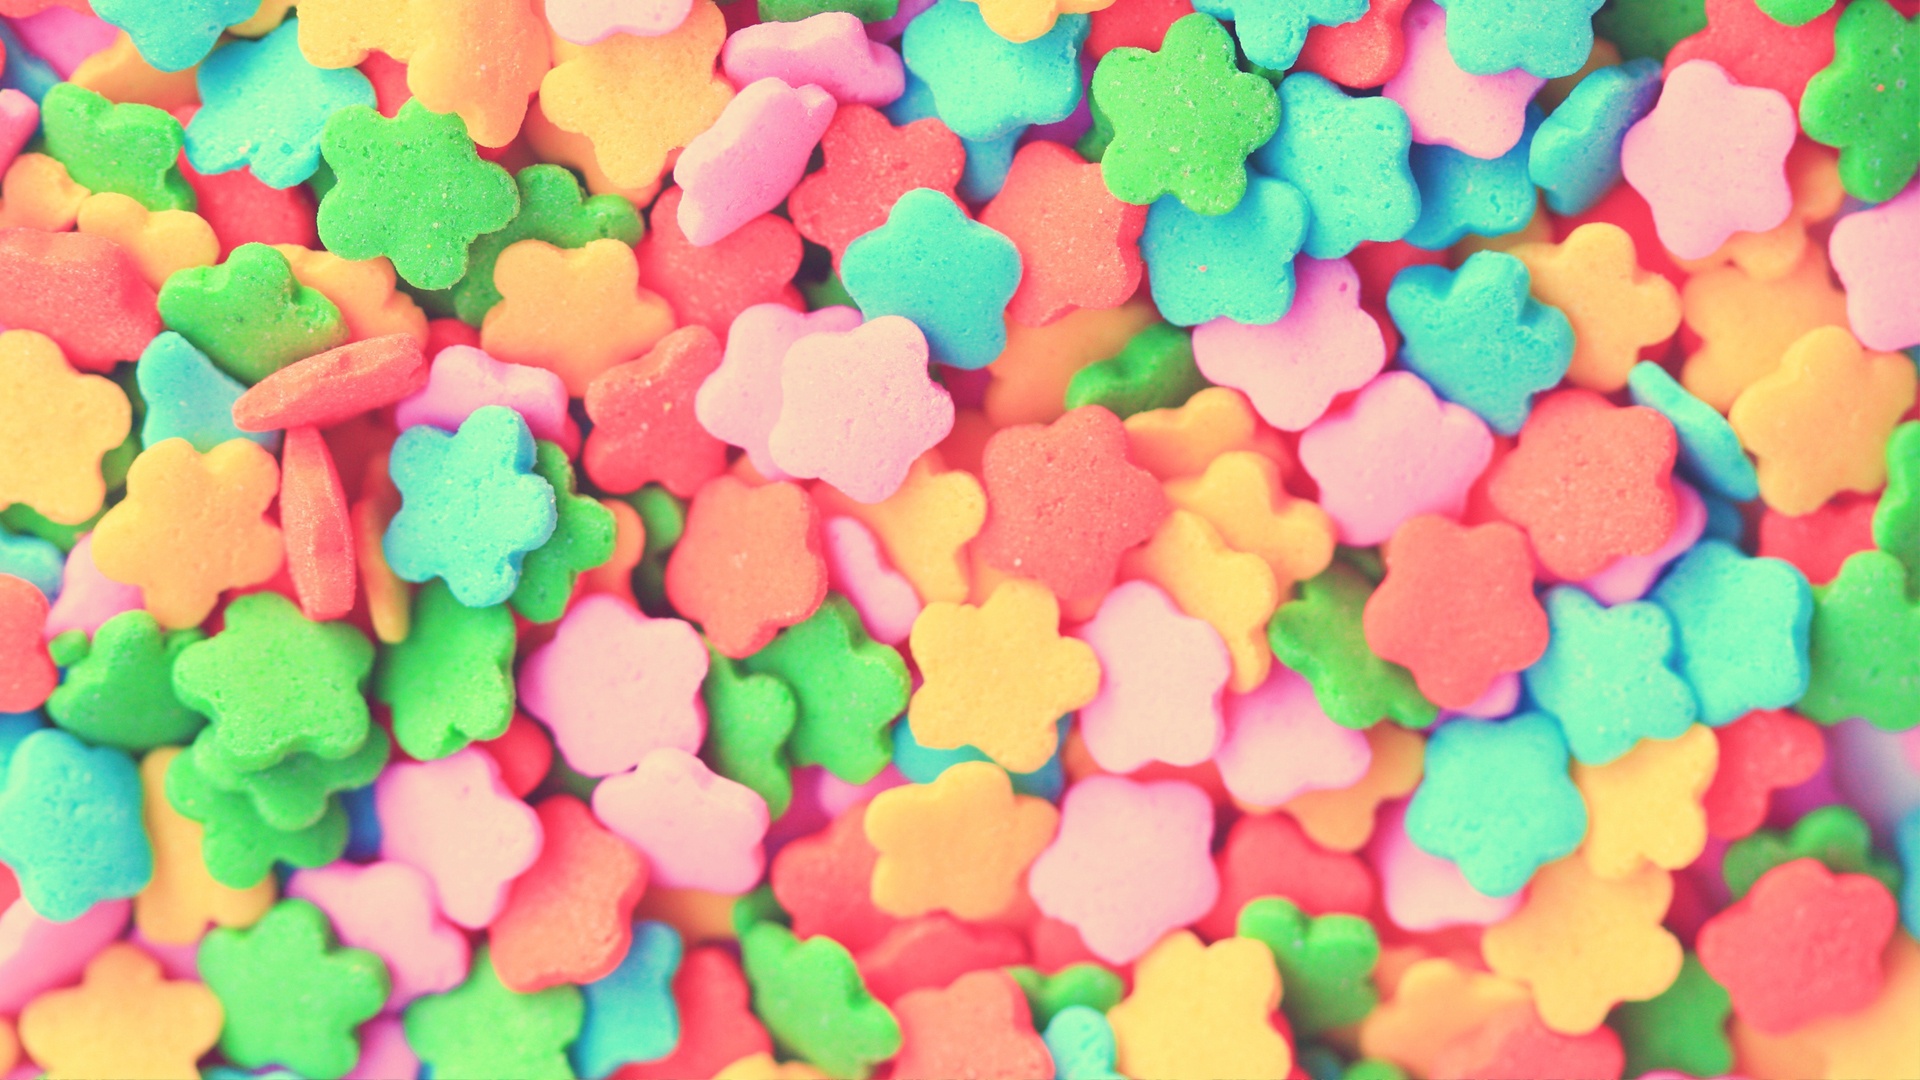 Colorful Candy Background Wallpapers   1920x1080   564315